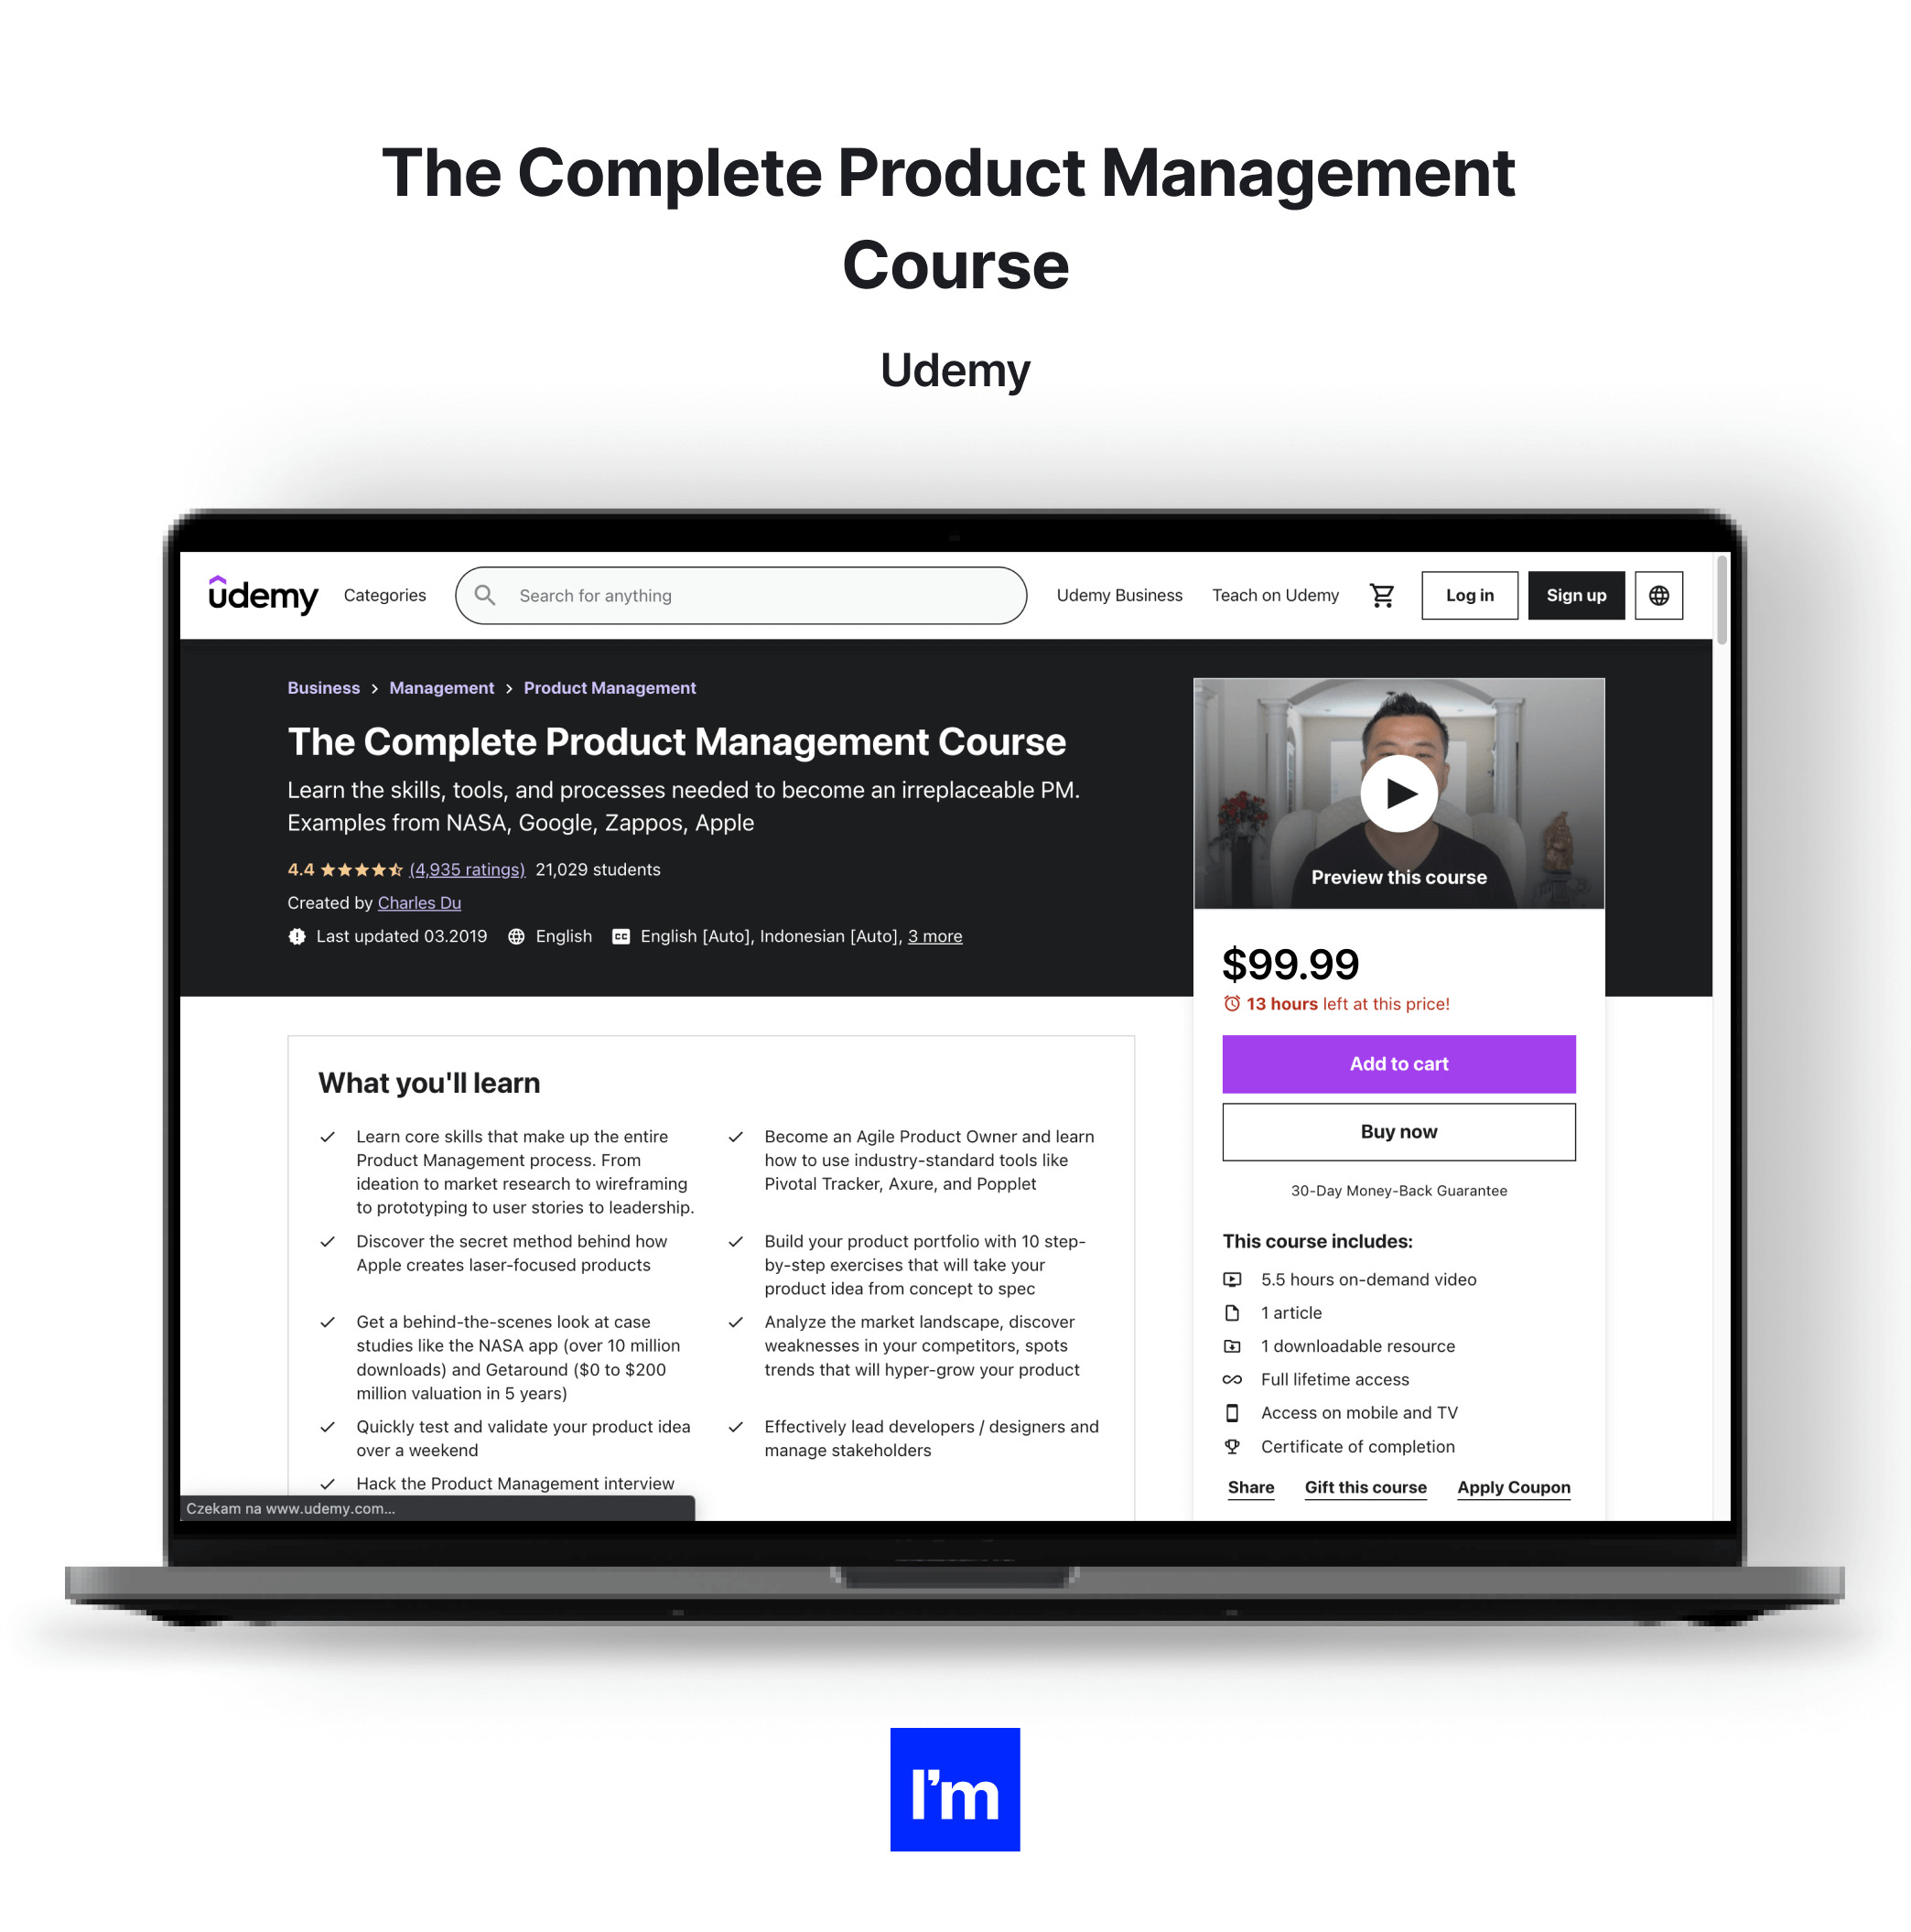 Top 10 Product Management Certification Programs - The Complete Product Management Course